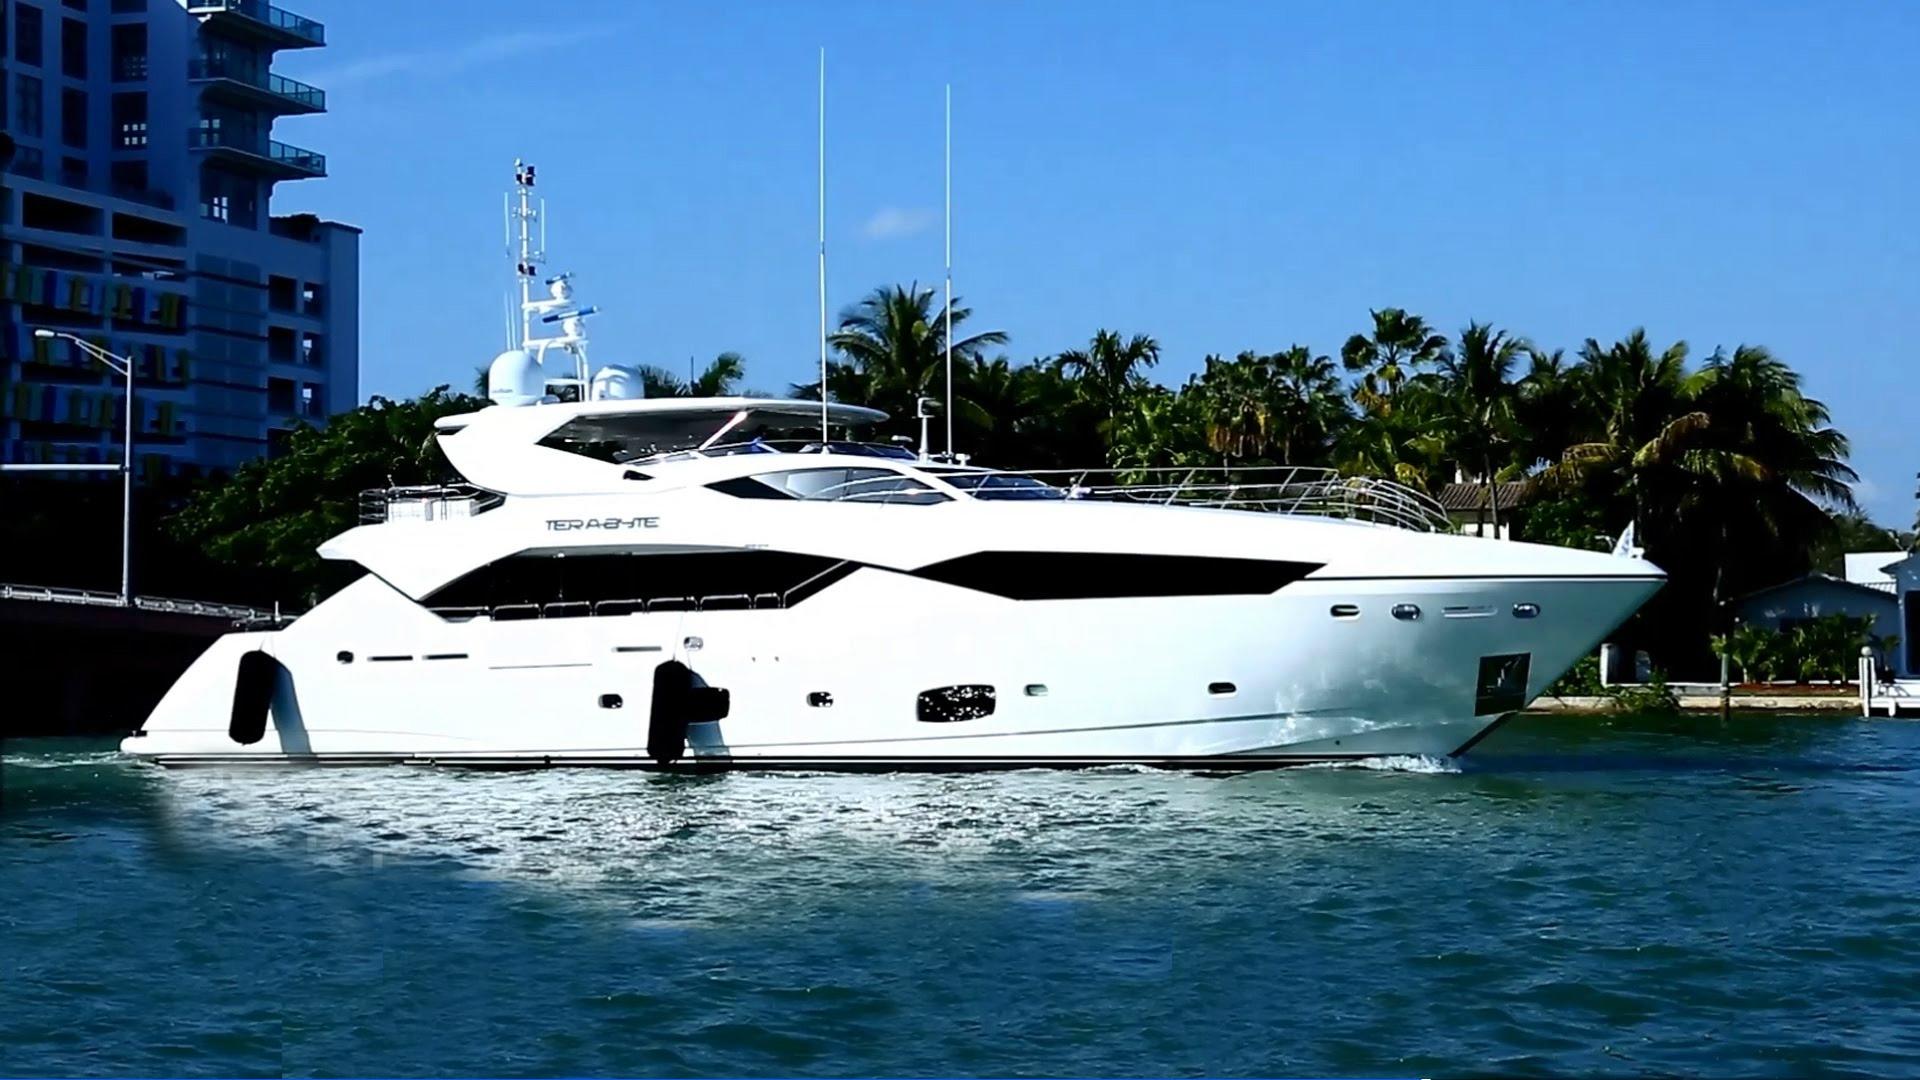 who owns terabyte yacht in fort myers